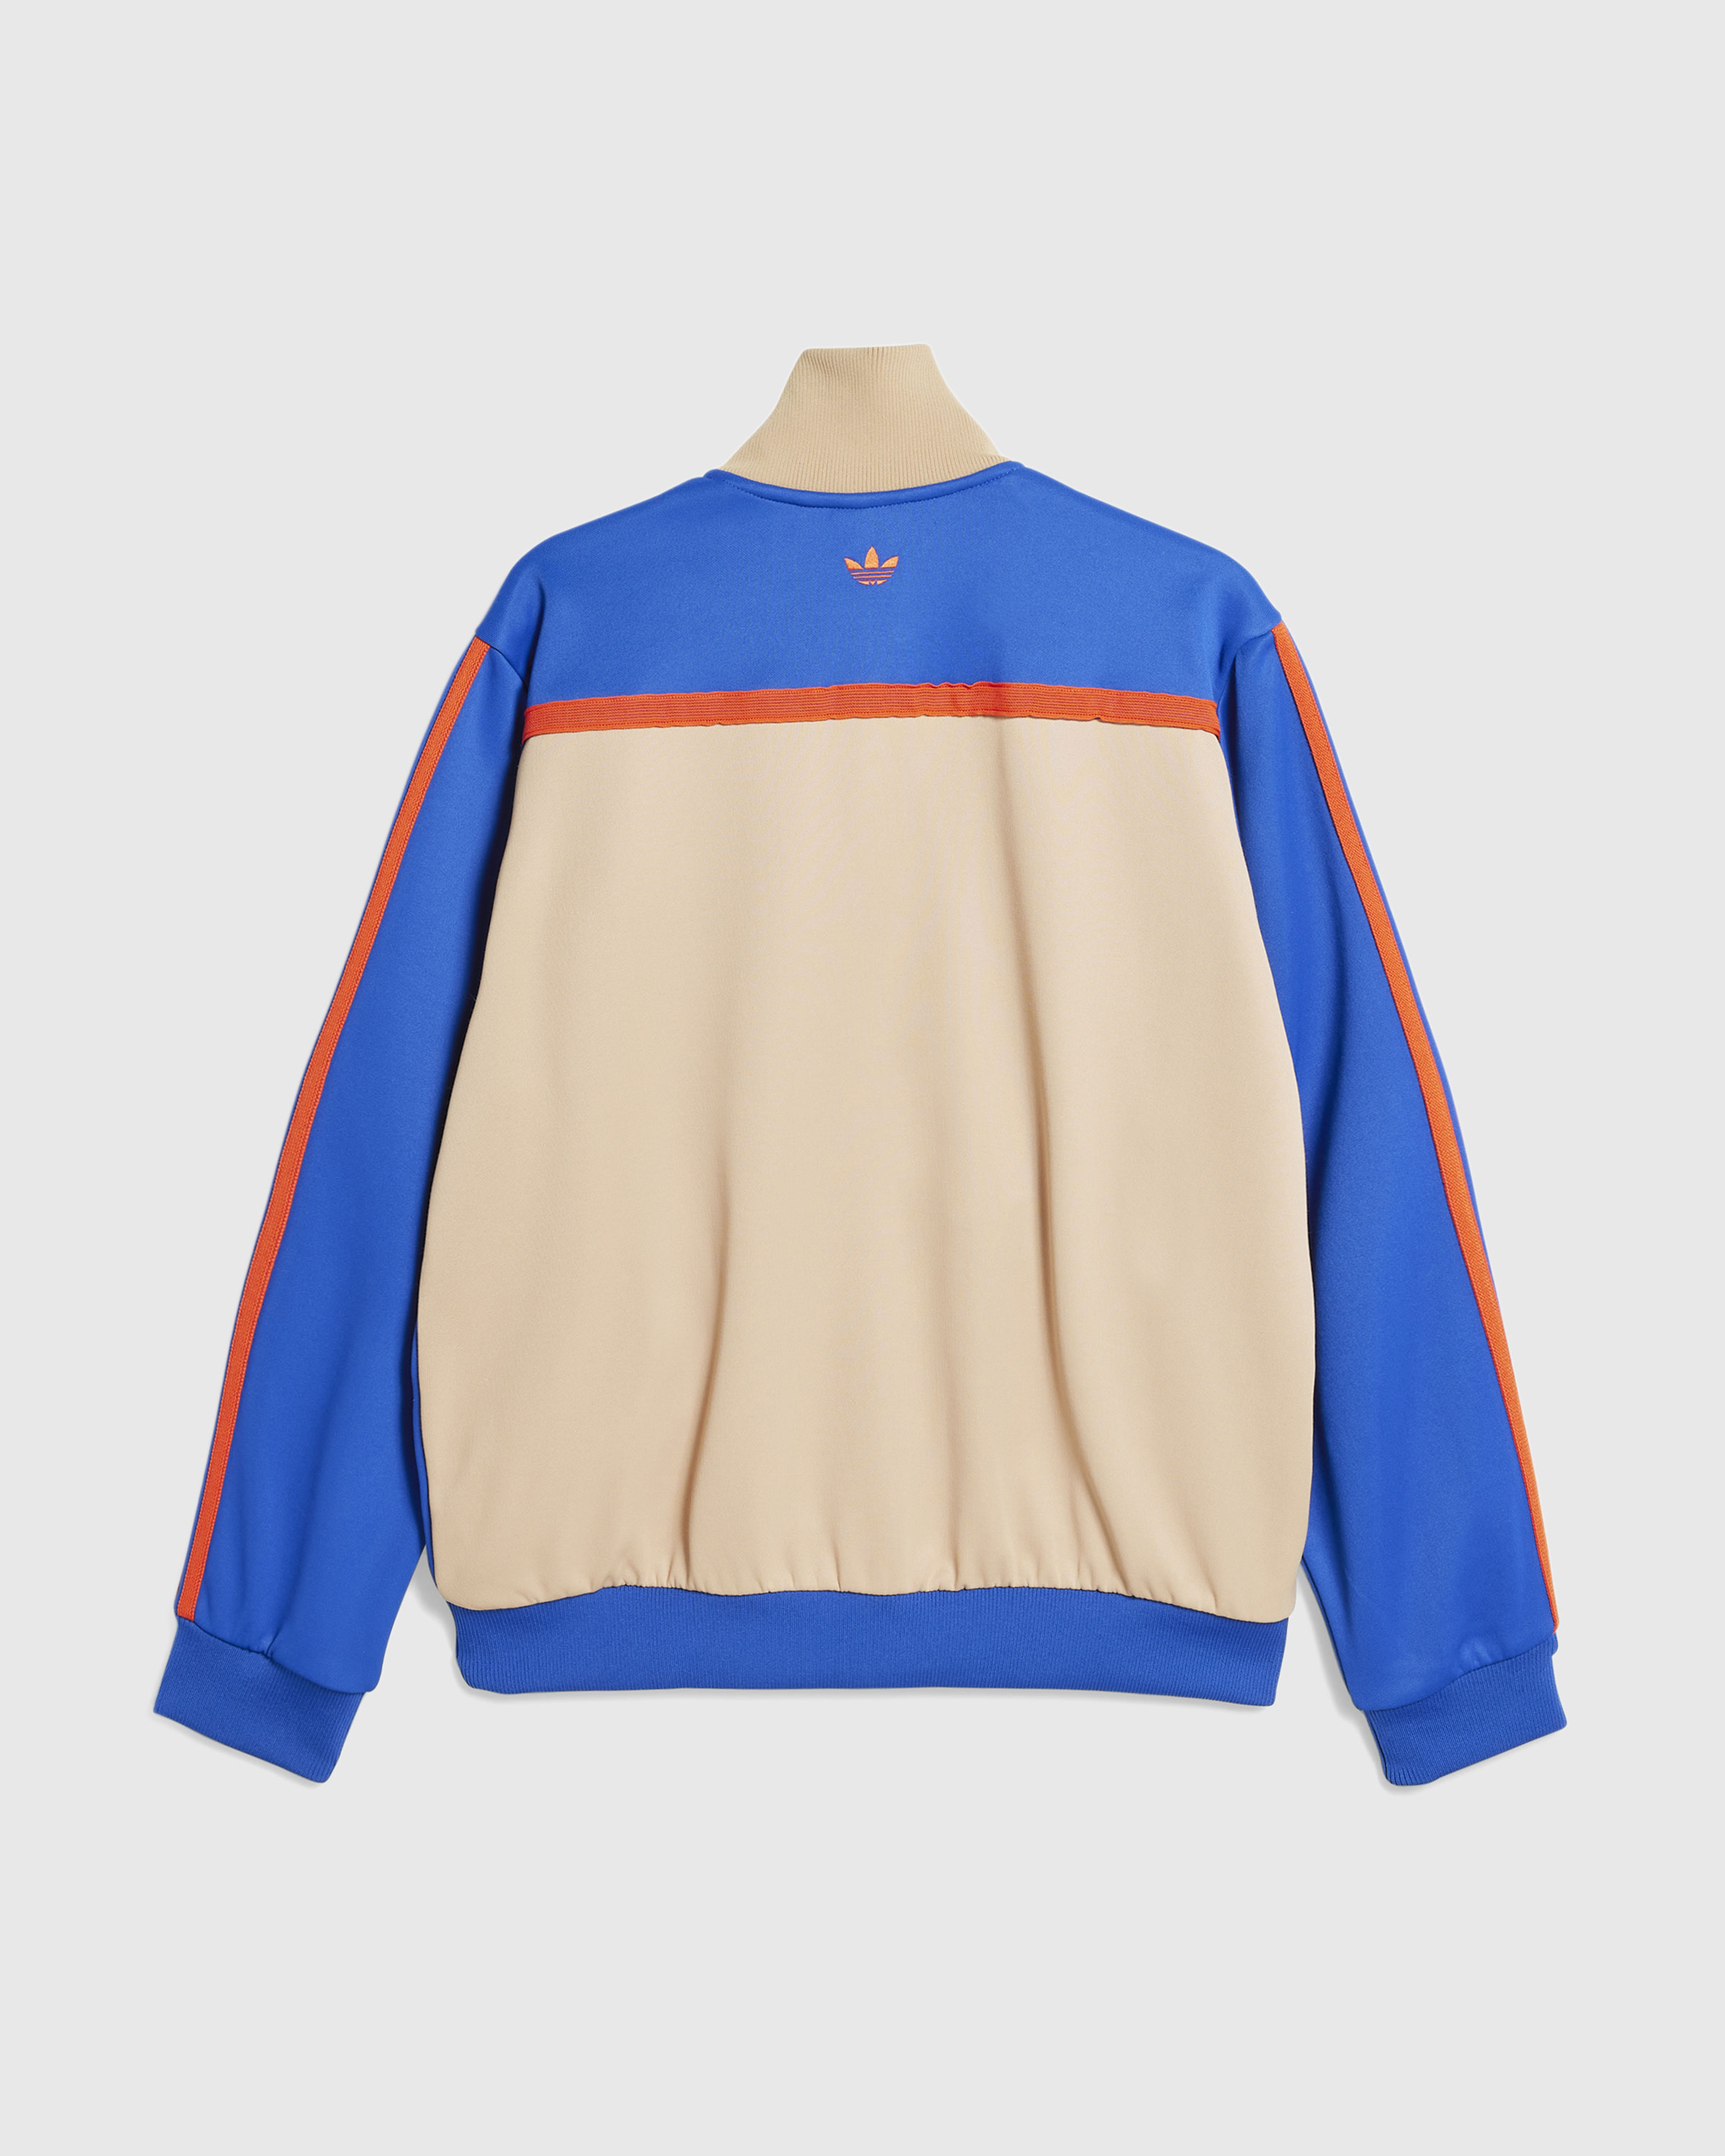 Adidas x Wales Bonner – Jersey Track Top Royal Blue - Track Jackets - Blue - Image 4